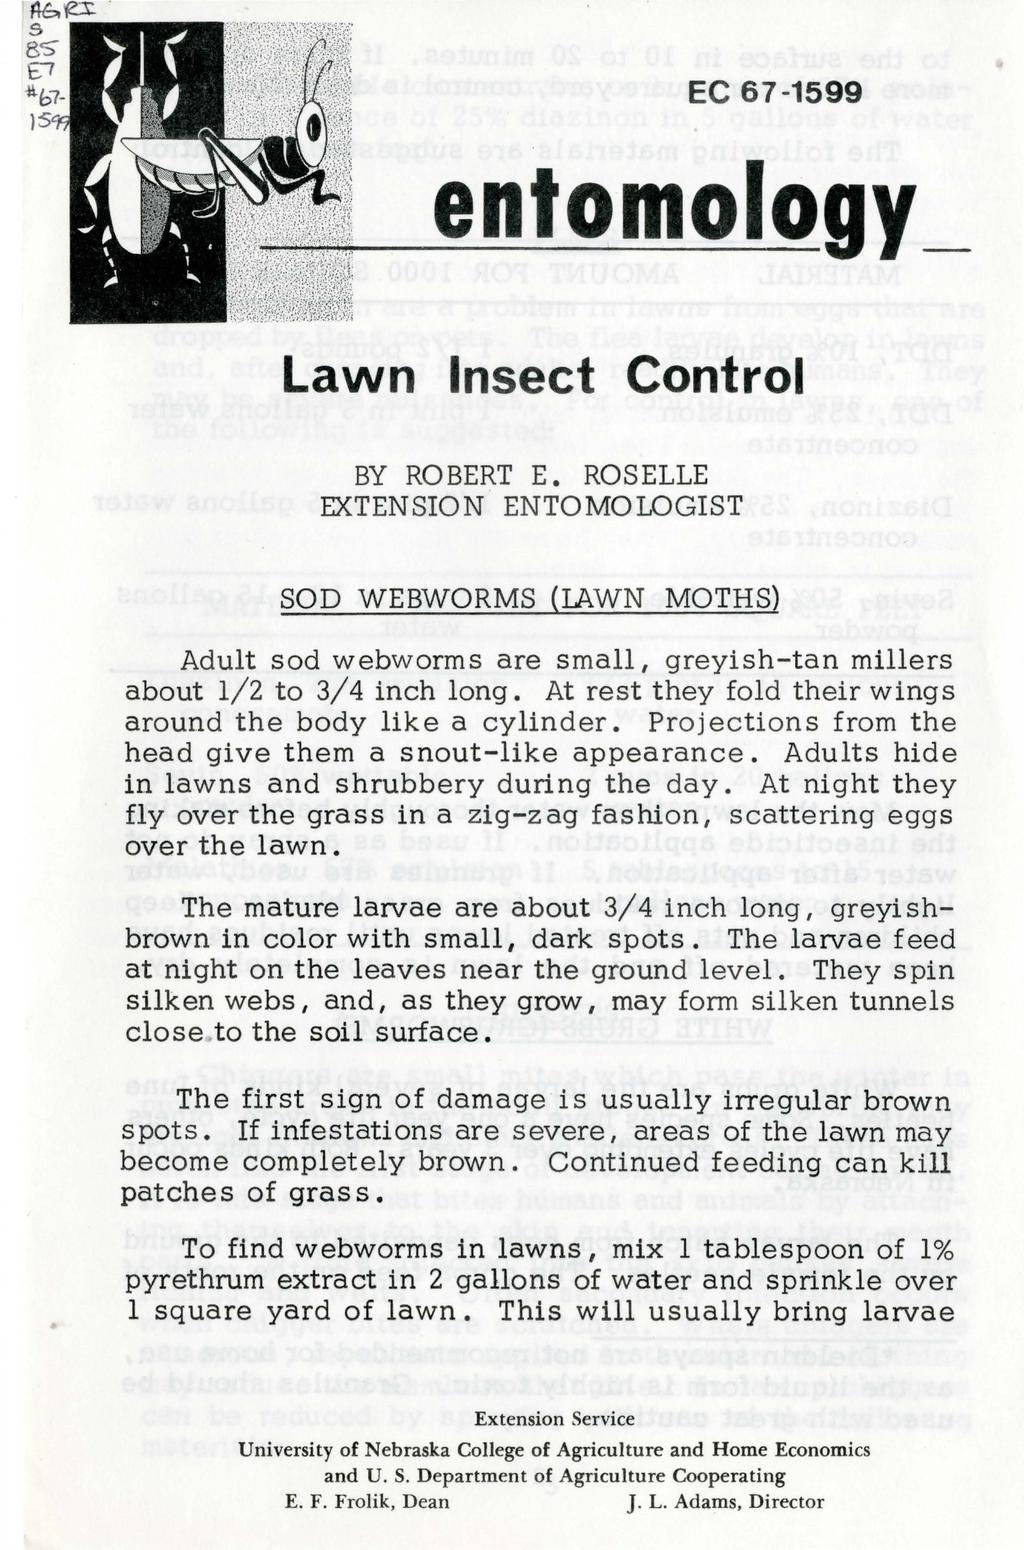 EC 67-1599 entomology_ Lawn Insect Control BY ROBERT E. ROSELLE EXTENSION ENTOMOLOGIST SOD WEBWORMS (lawn MOTHS) Adult sod webworms are small, greyish-tan millers about l/2 to 3/4 inch long.